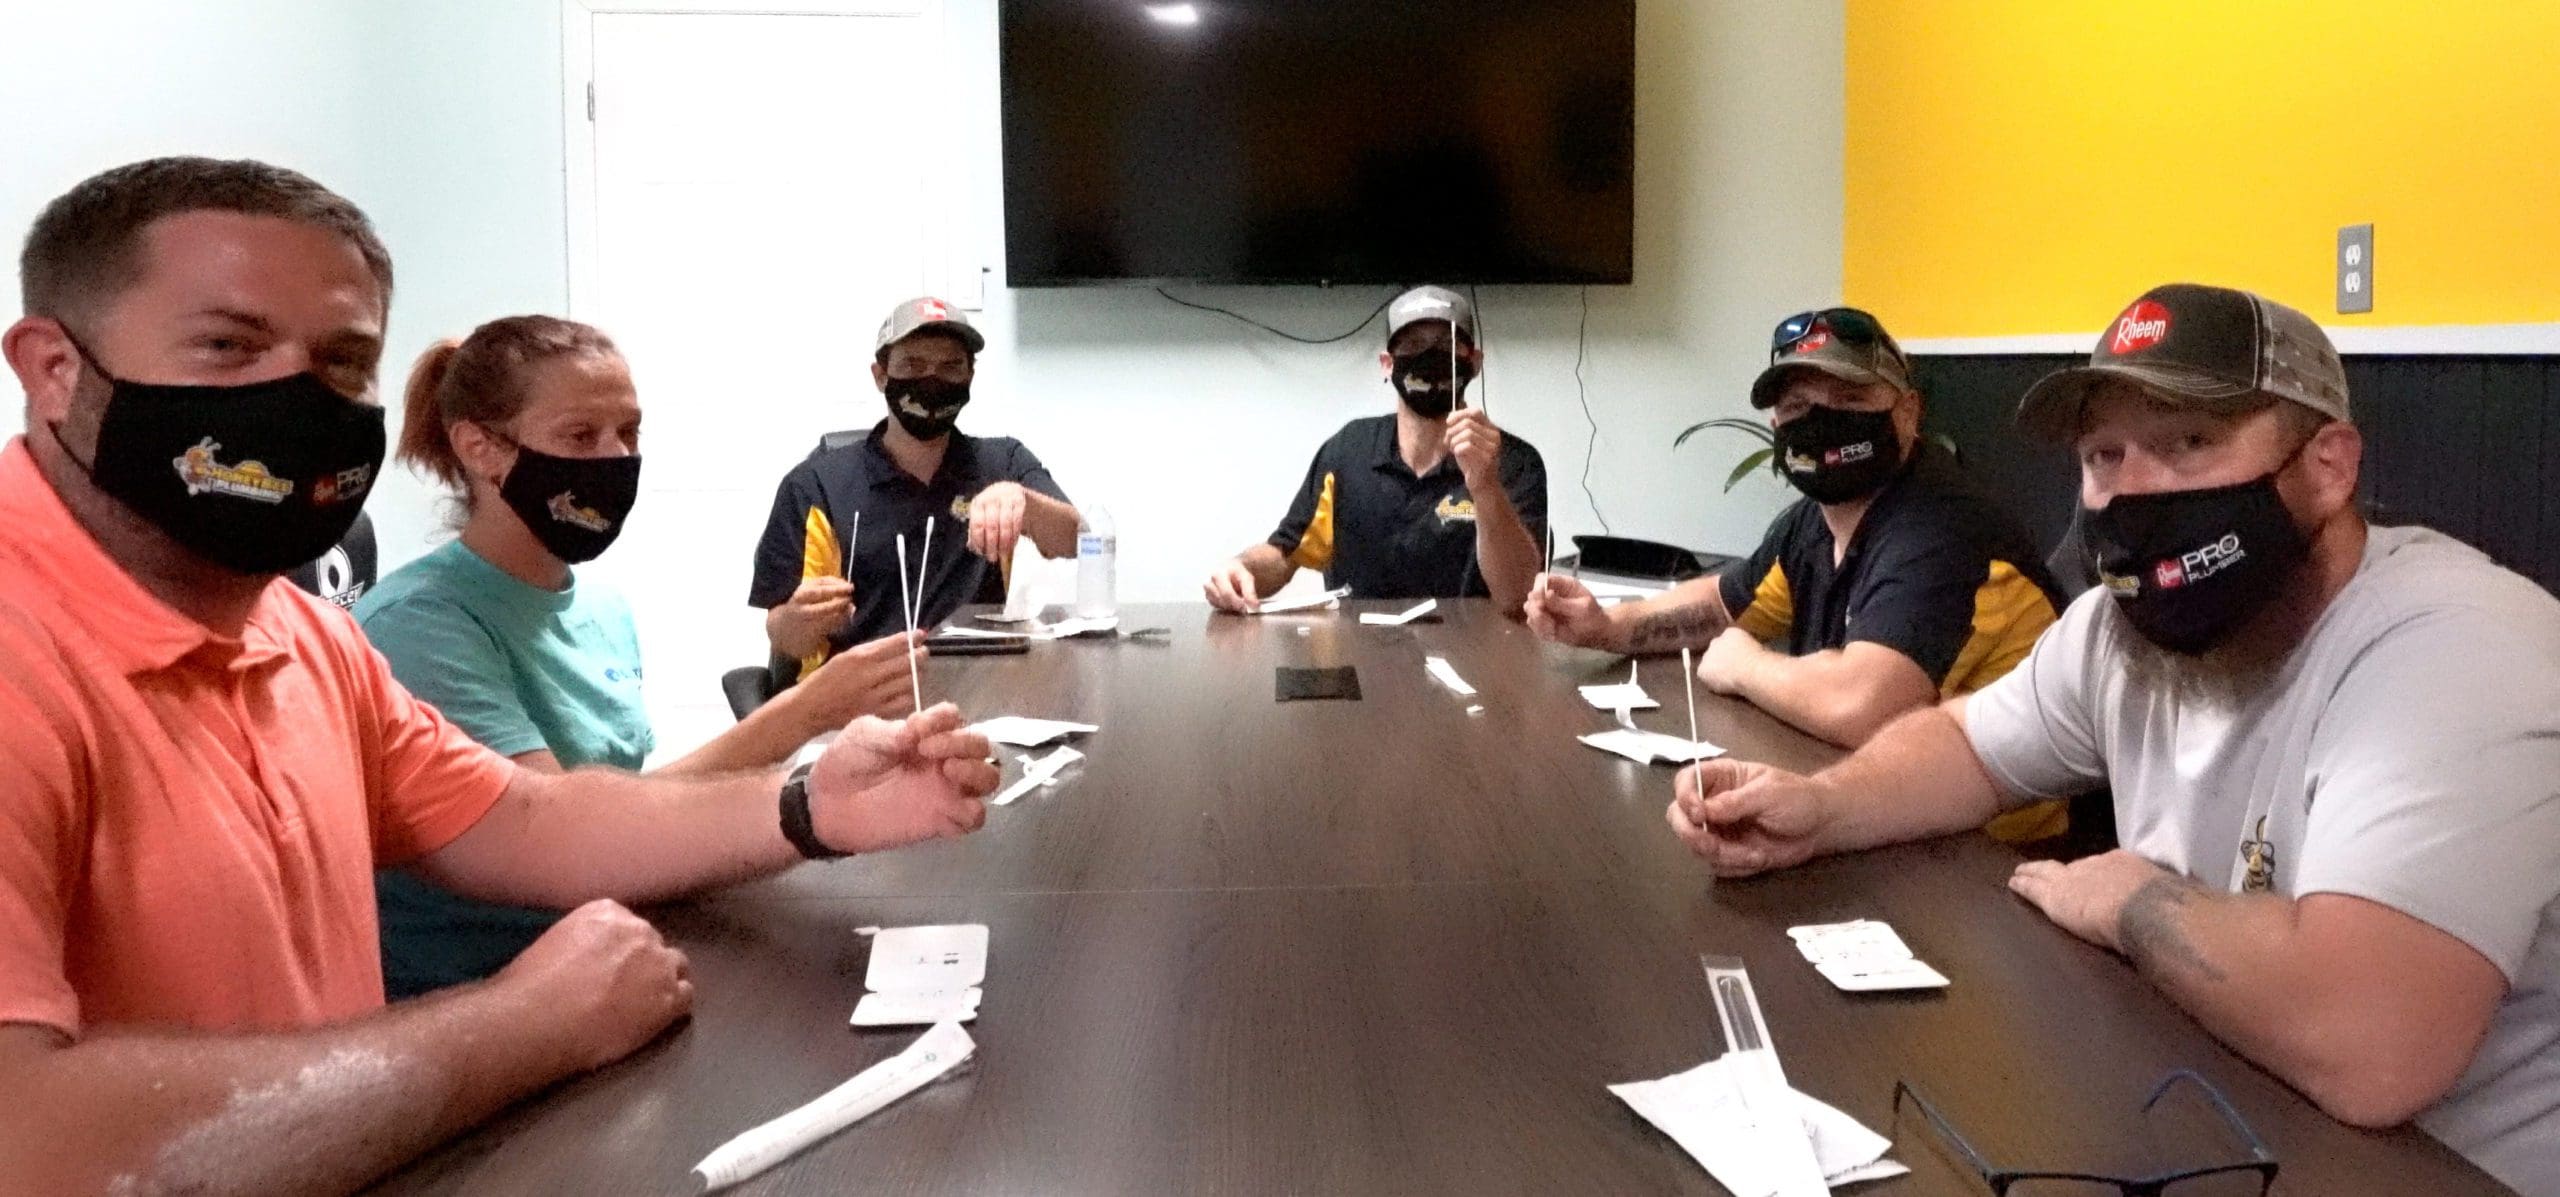 Honey Bee Plumbing team members sitting at a conference table, performing COVID-19 testing before starting their workday